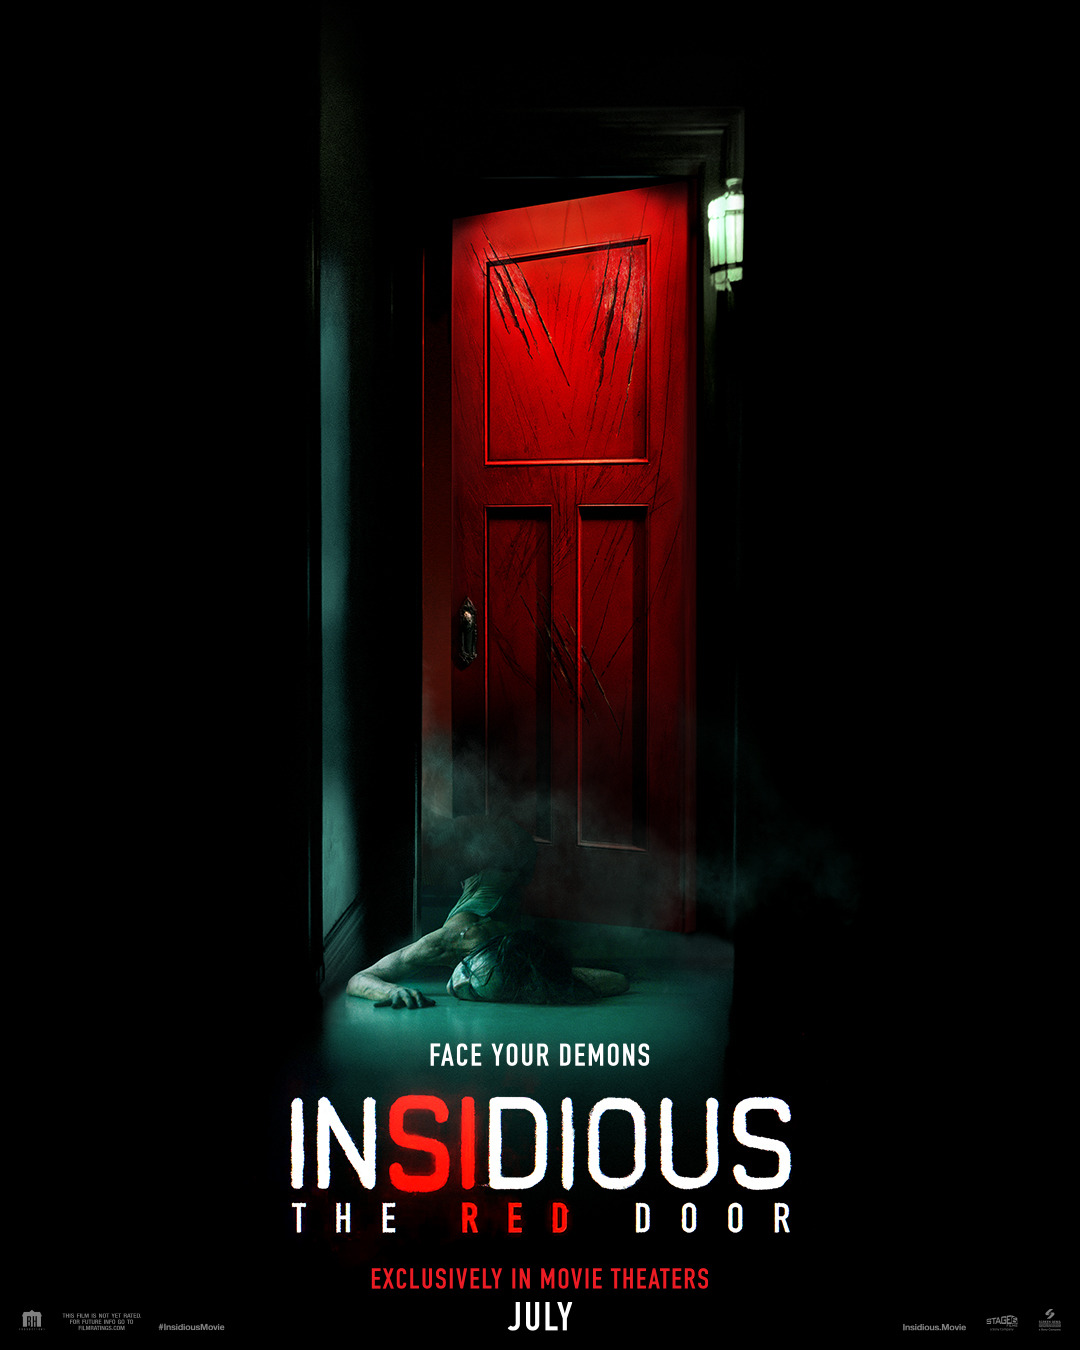 ‘Insidious: The Red Door’ film poster | Sony Pictures